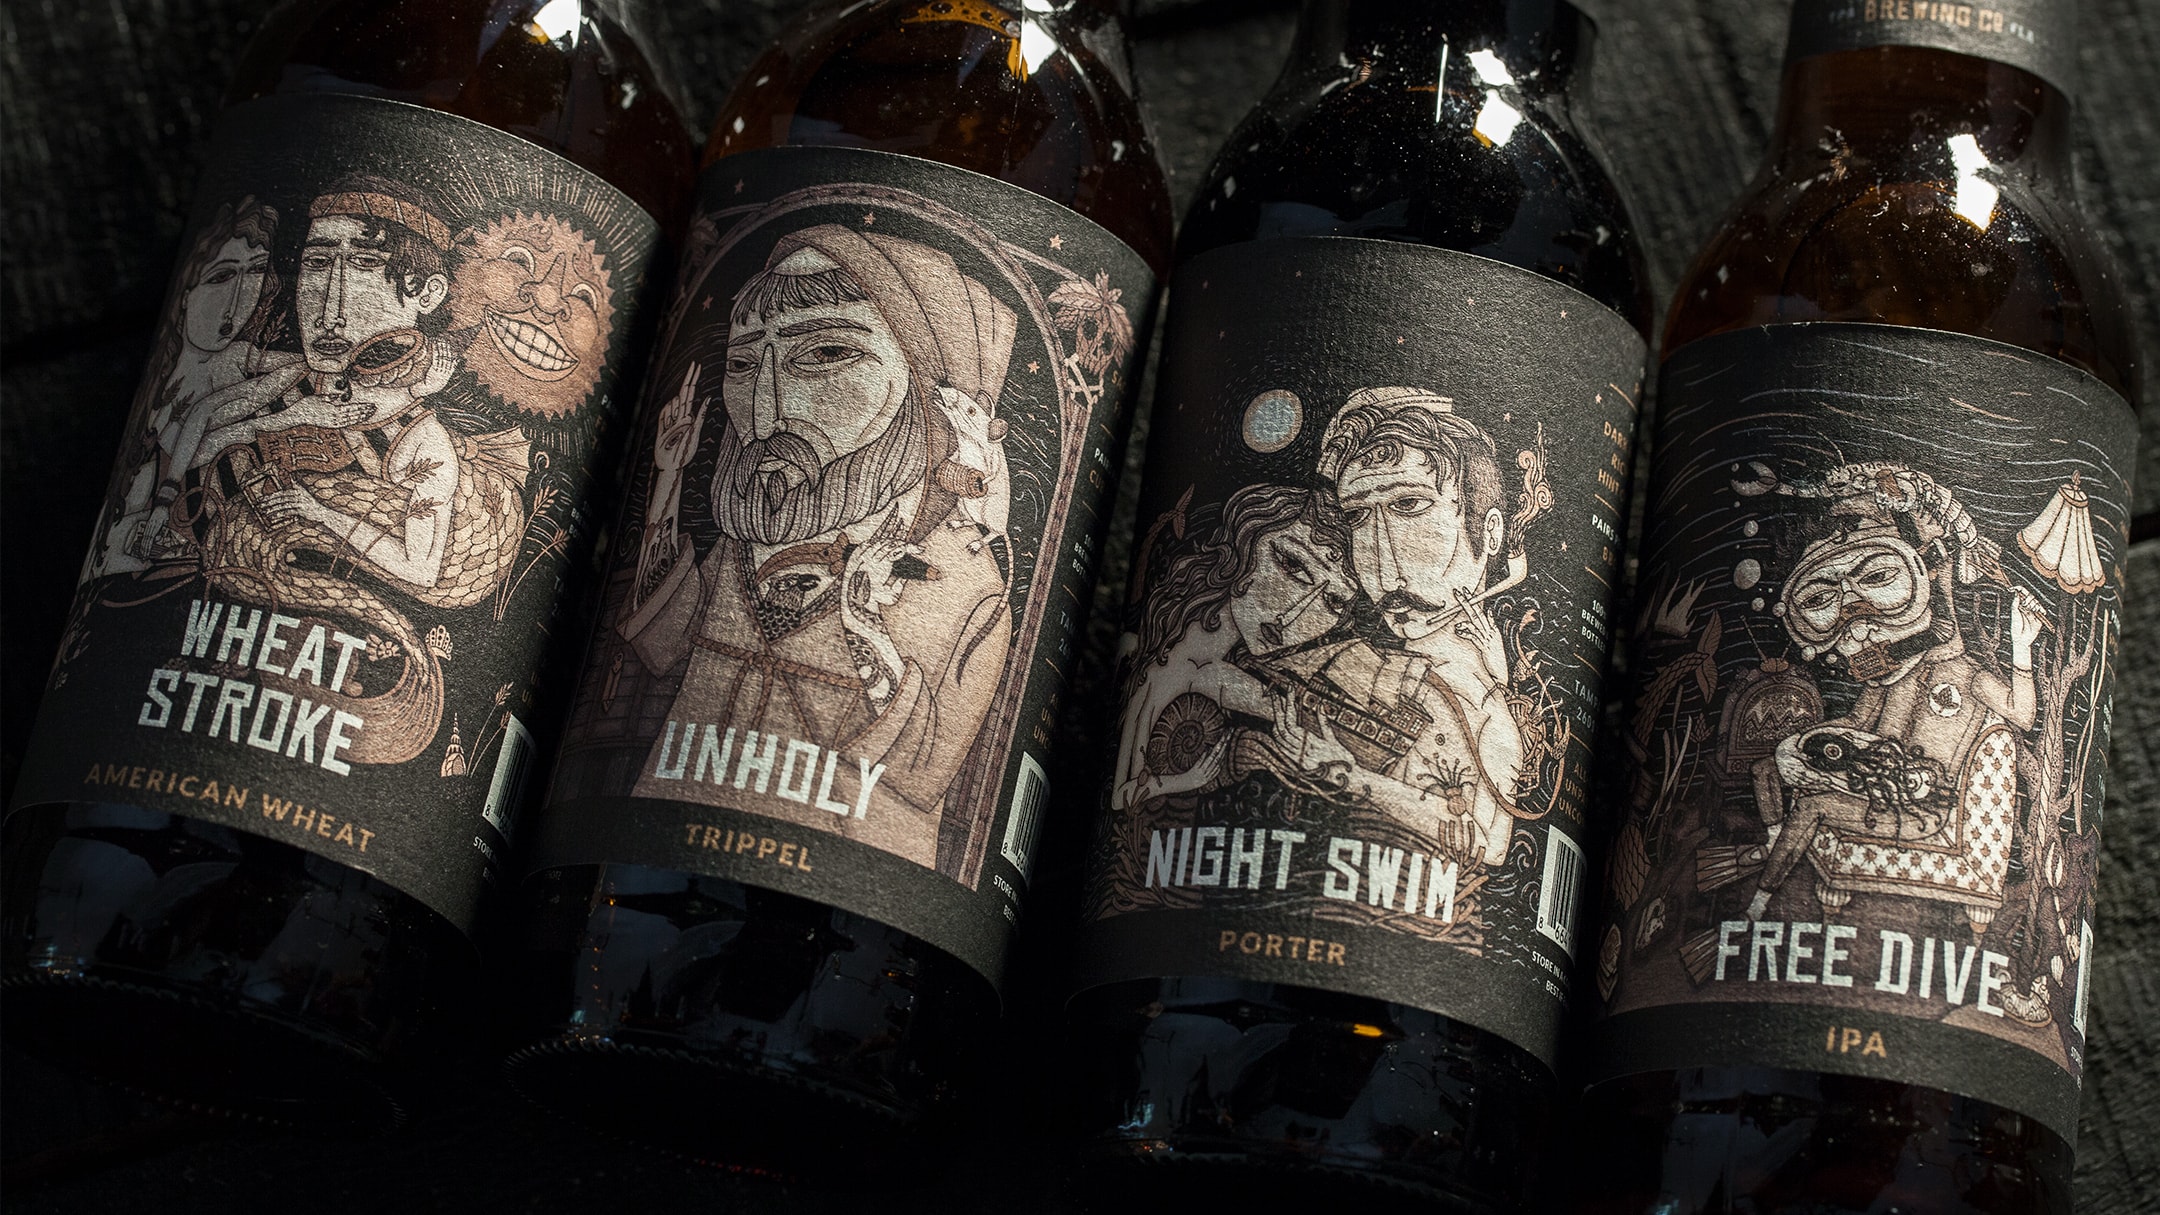 Coppertail Beer Bottle designs seen on their core 4.